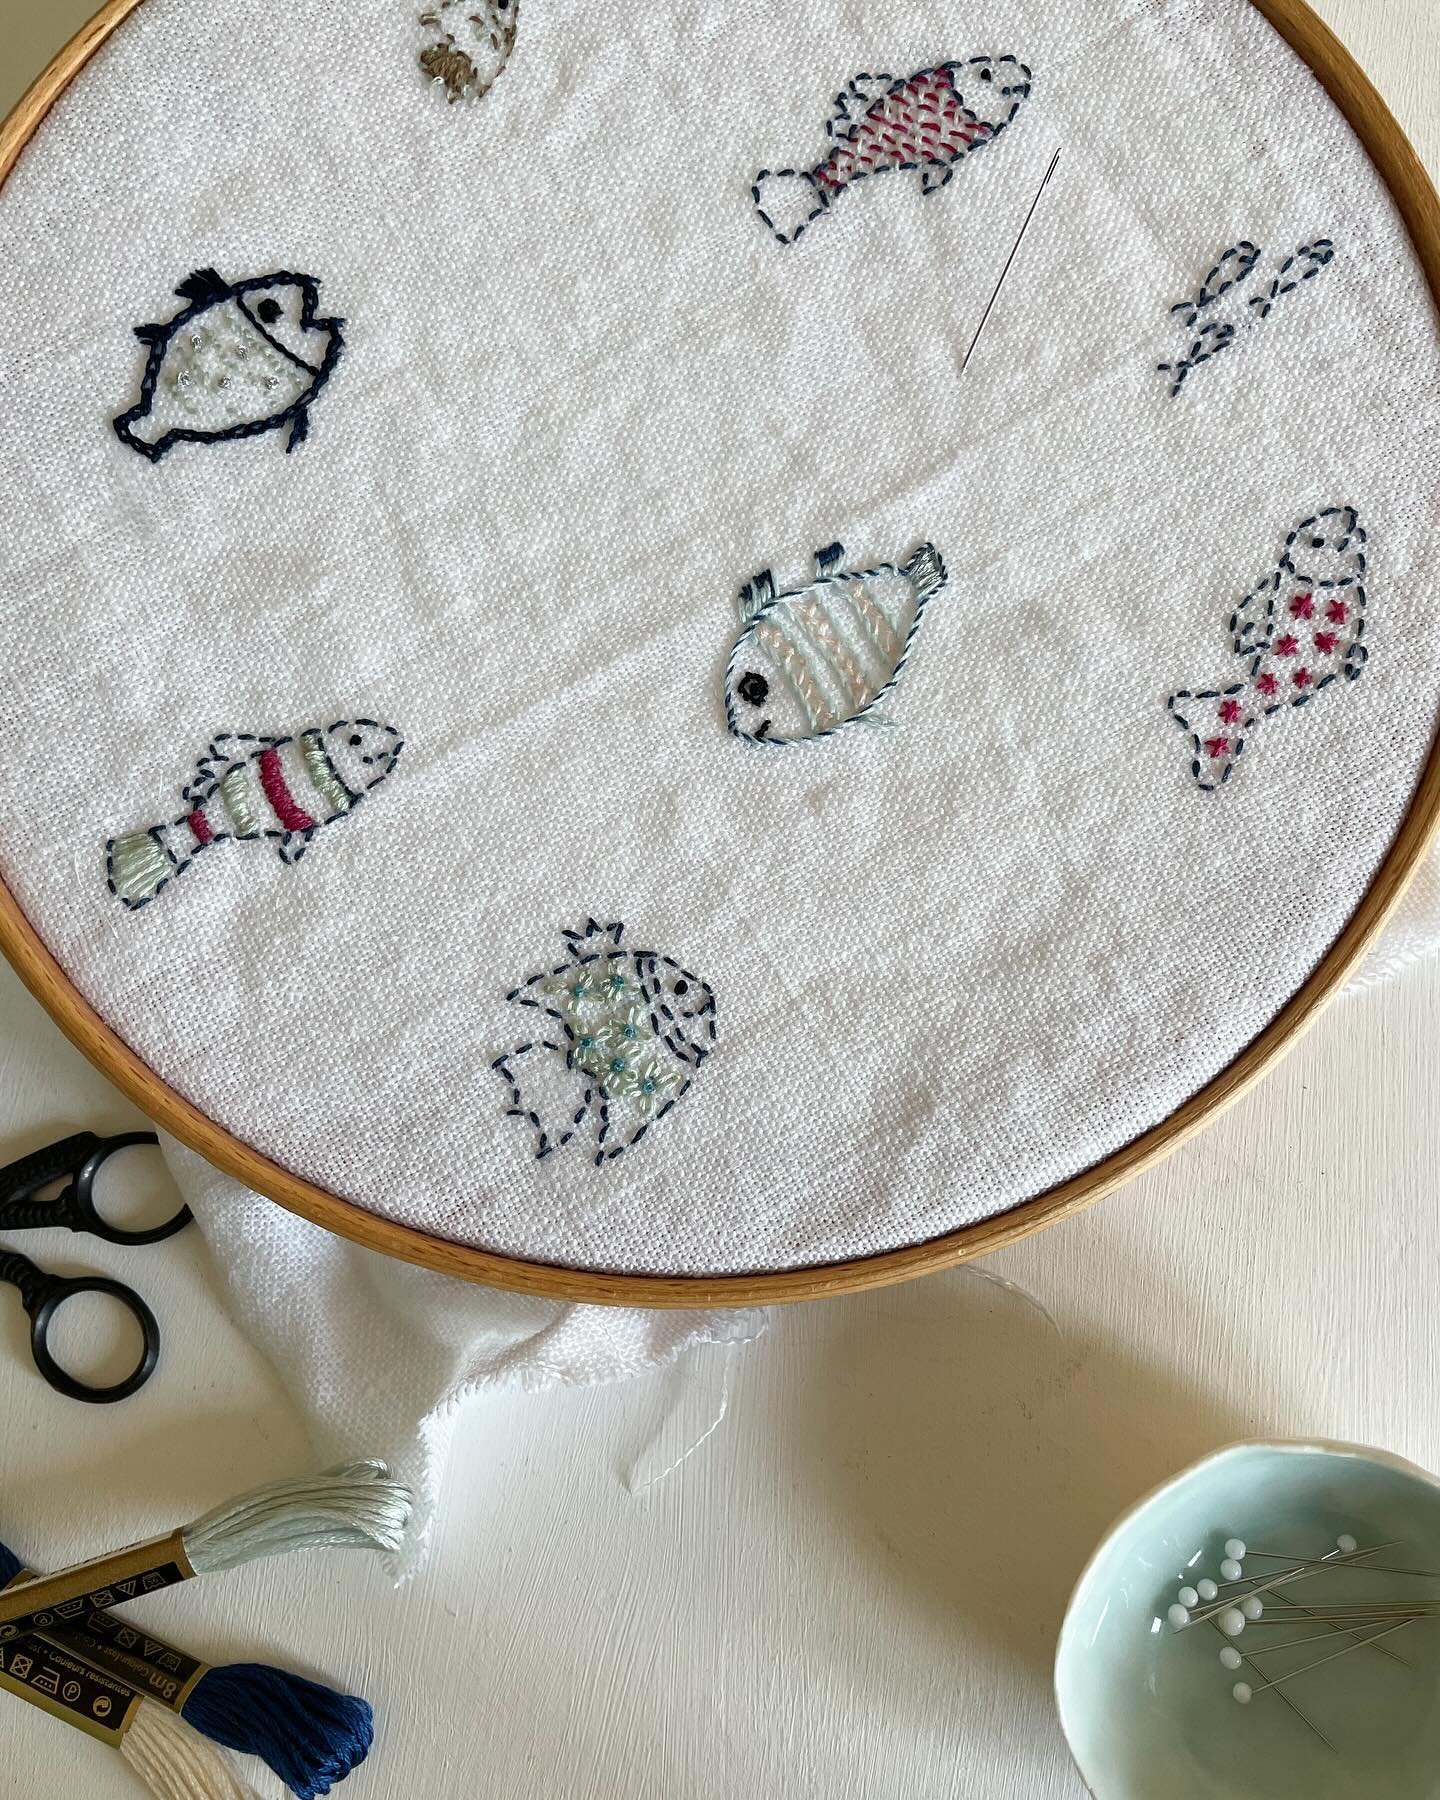 Warning : this post is a little fishy!

I&rsquo;ve been toying with the idea of making some new table linen for a while and so over the past few days I&rsquo;ve been stitchdoodling (does that word exist?) a shoal lot of fish .. I started with more so